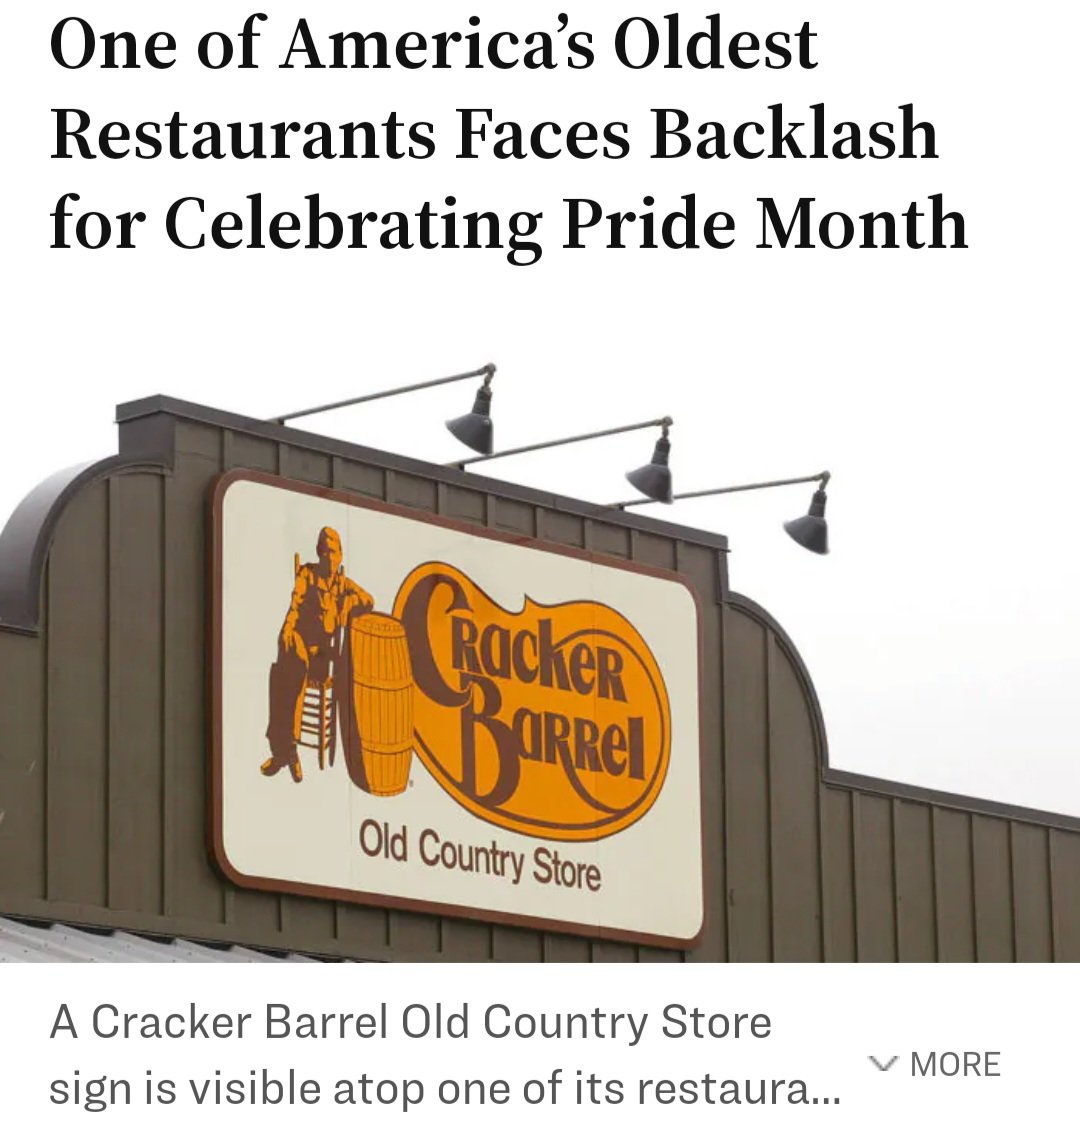 BREAKING NEWS One of America's Oldest Restaurants Faces Backlash for Celebrating Pride Month.

Cracker Barrel jumps the shark and stabs its customers & employees in the back. BlackRock owns 15% shareholder stake in Cracker Barrel as well as in Fox News.

Do woke corporations…